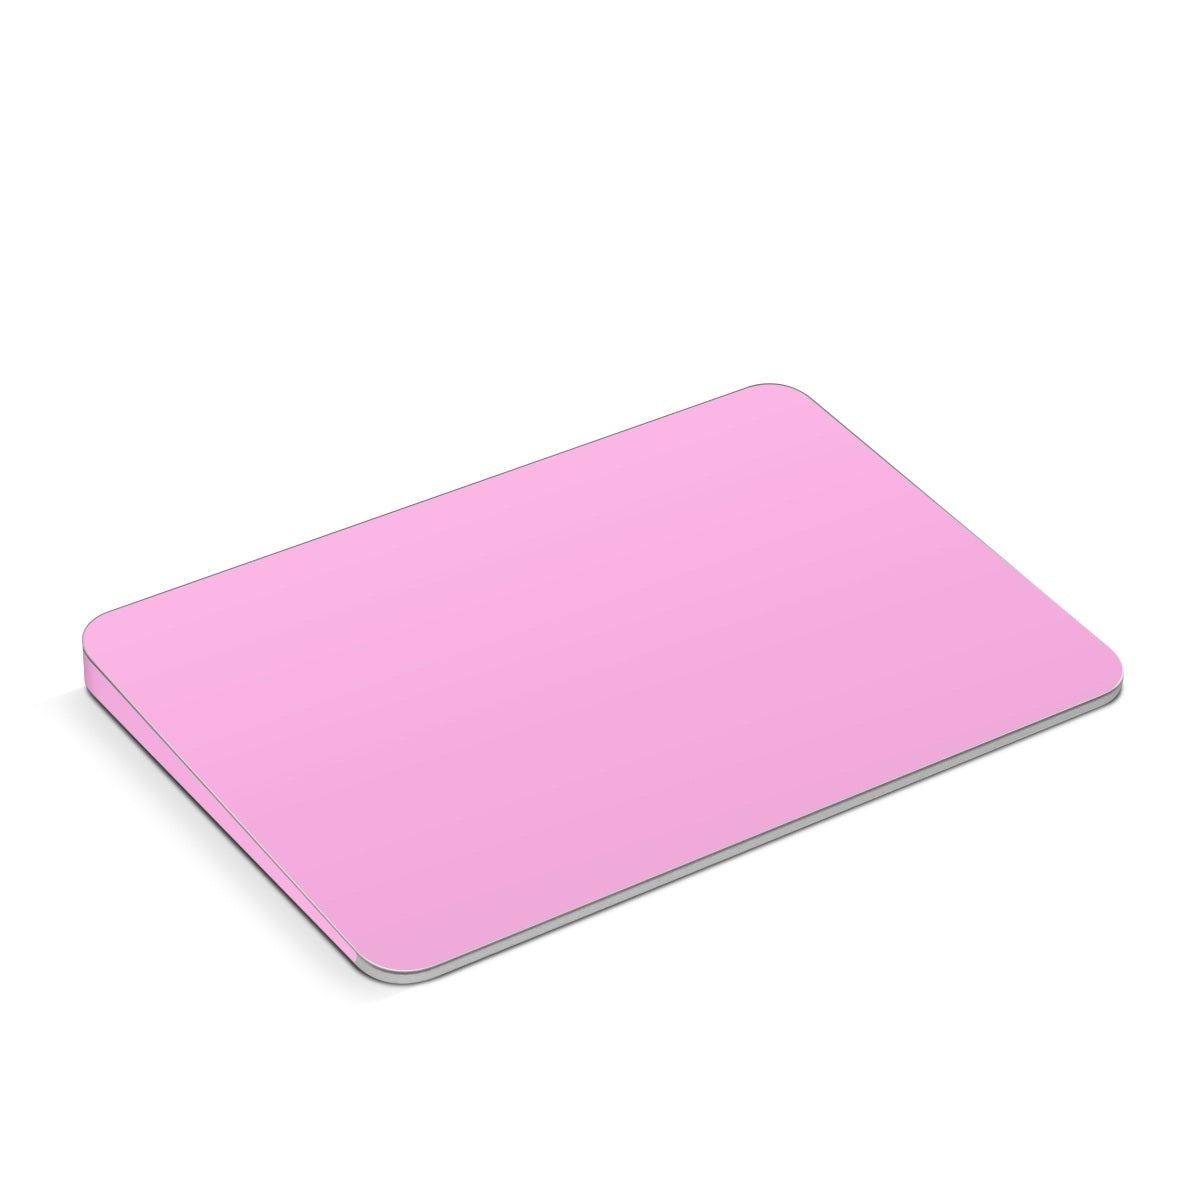 Solid State Pink - Apple Magic Trackpad Skin